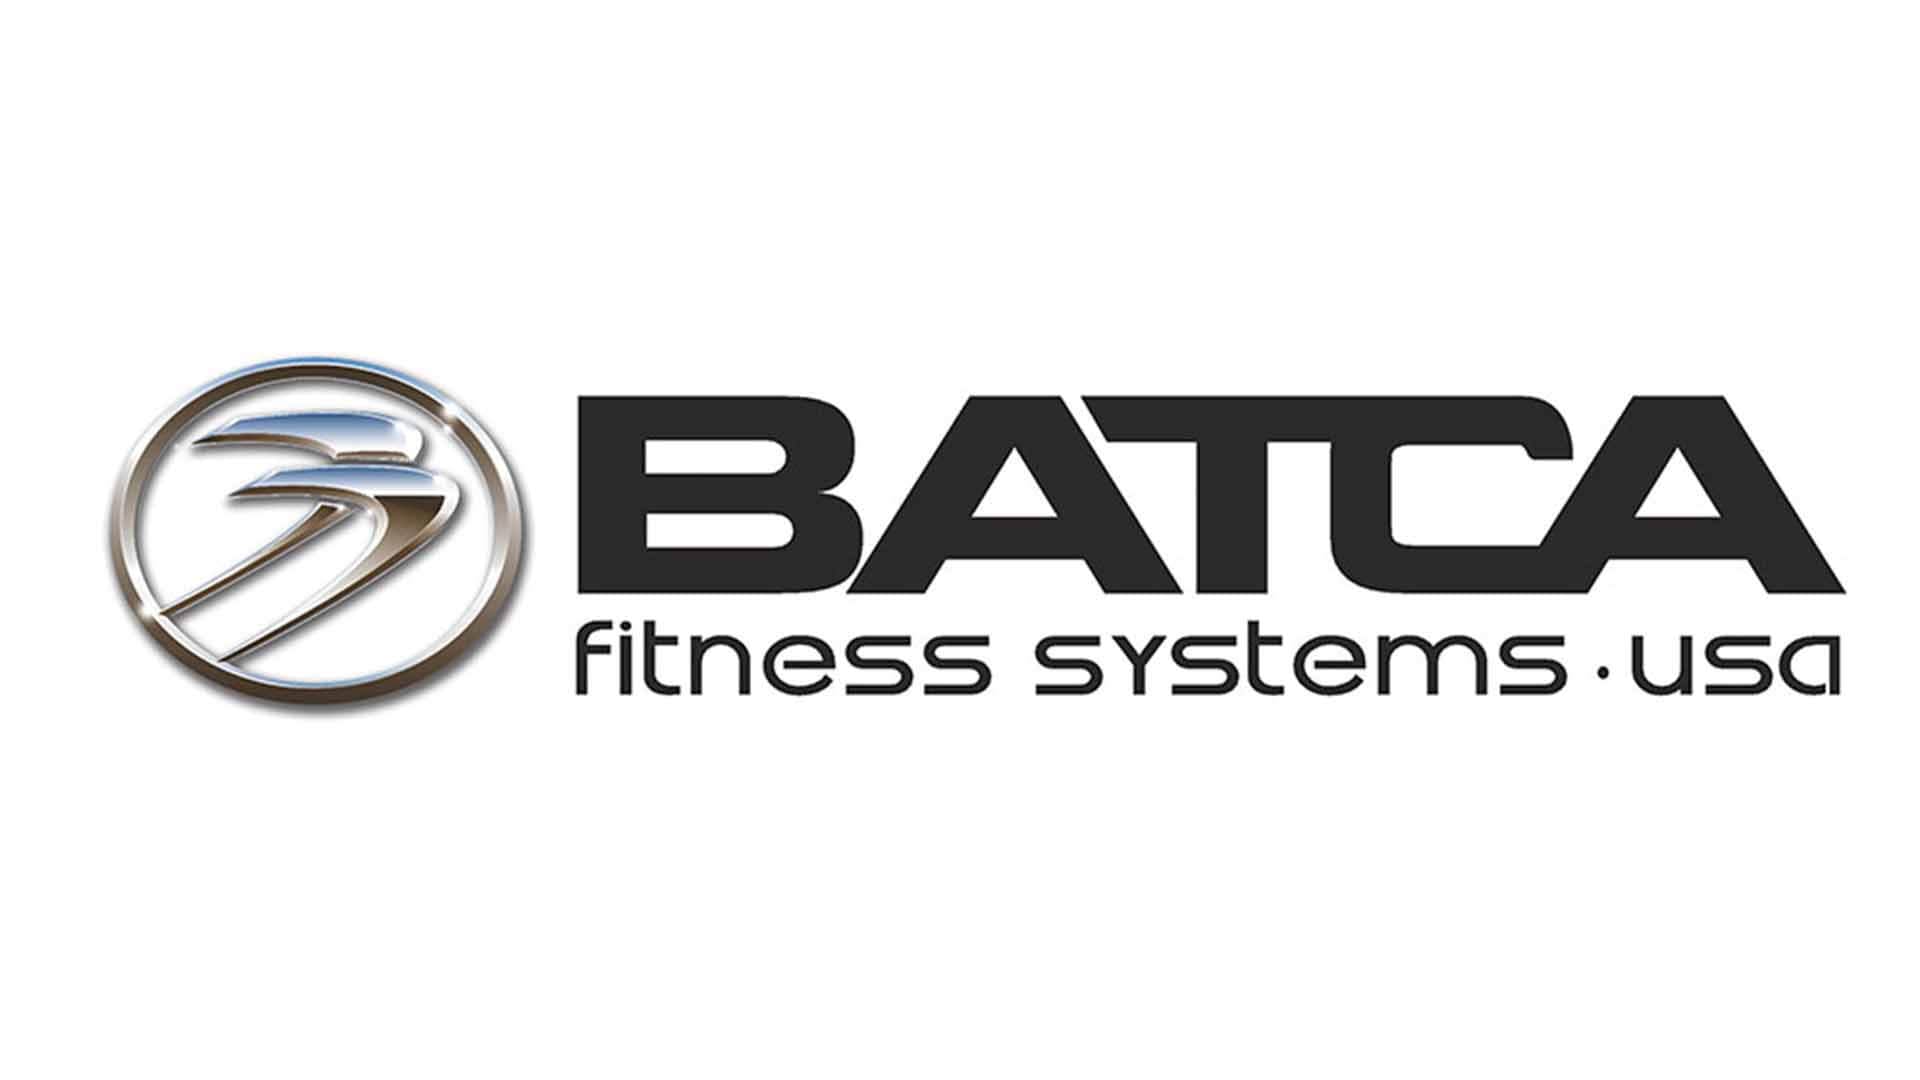 A logo of the company batch fitness systems.